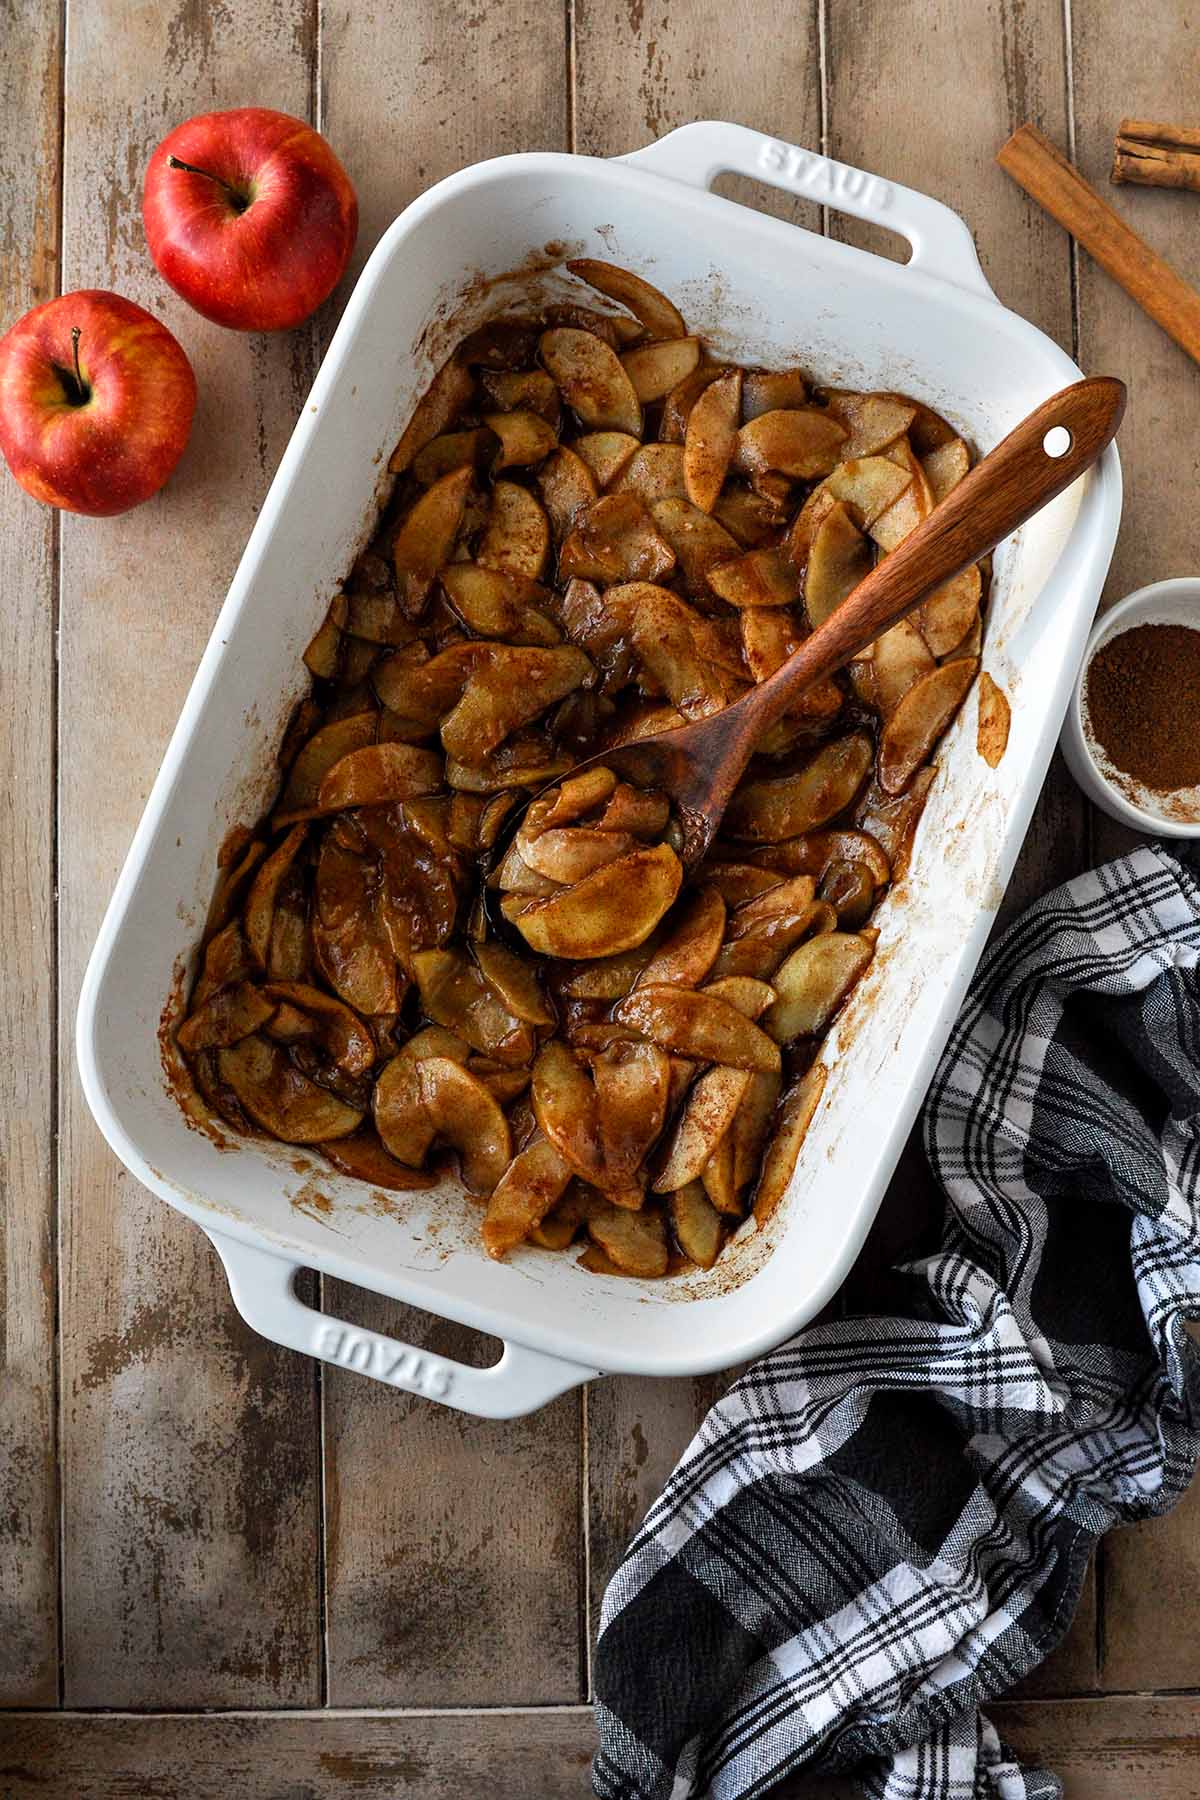 Above view of baking dish of apples with a black and white striped towel and whole apples.